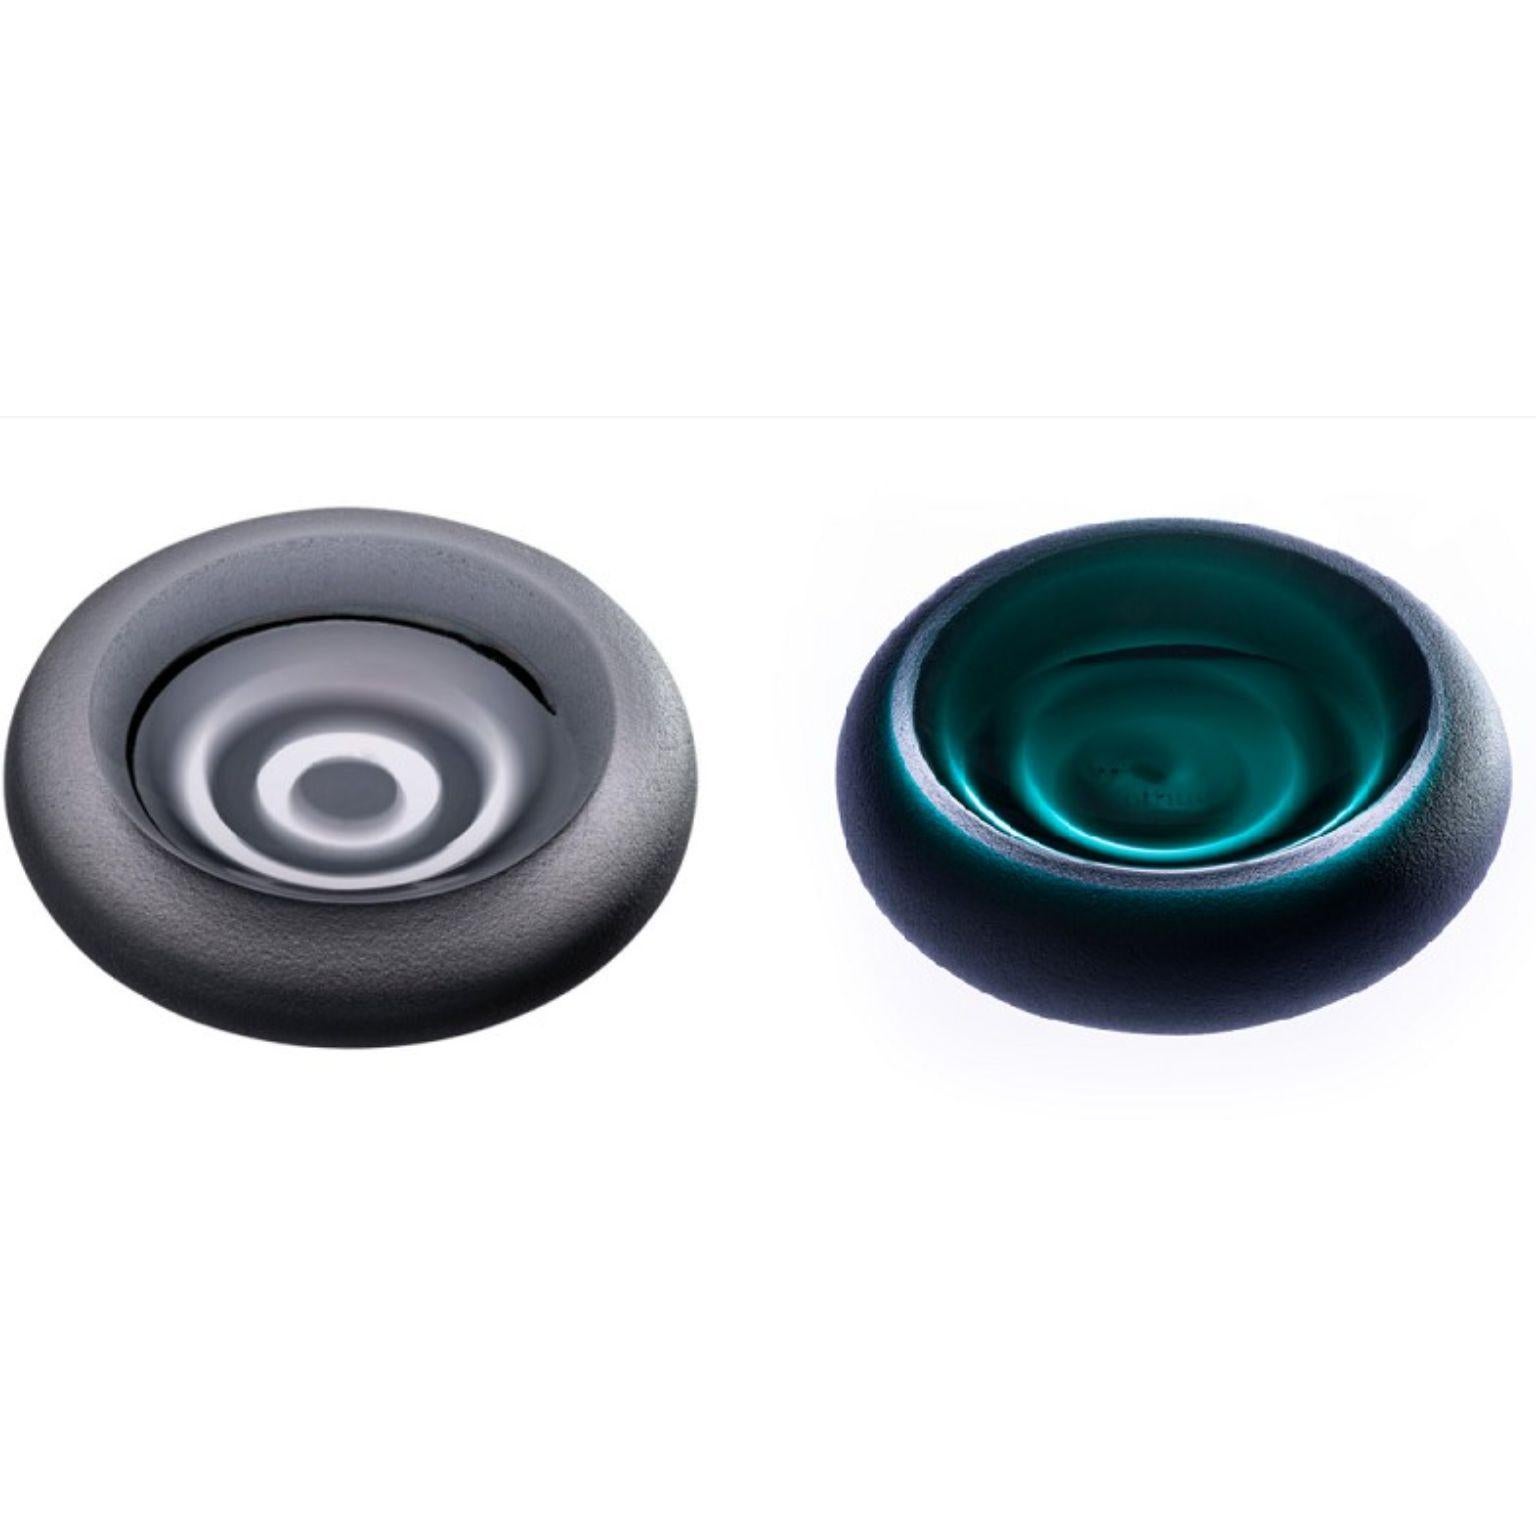 Set of 2 Incisioni Iridi Sand Ashtrays by Purho
Dimensions: D14x H3.5 cm each
Materials: Glass
Other colours and dimensions are available.

Purho is a new protagonist of made in Italy design , a work of synthesis, a research that has lasted for